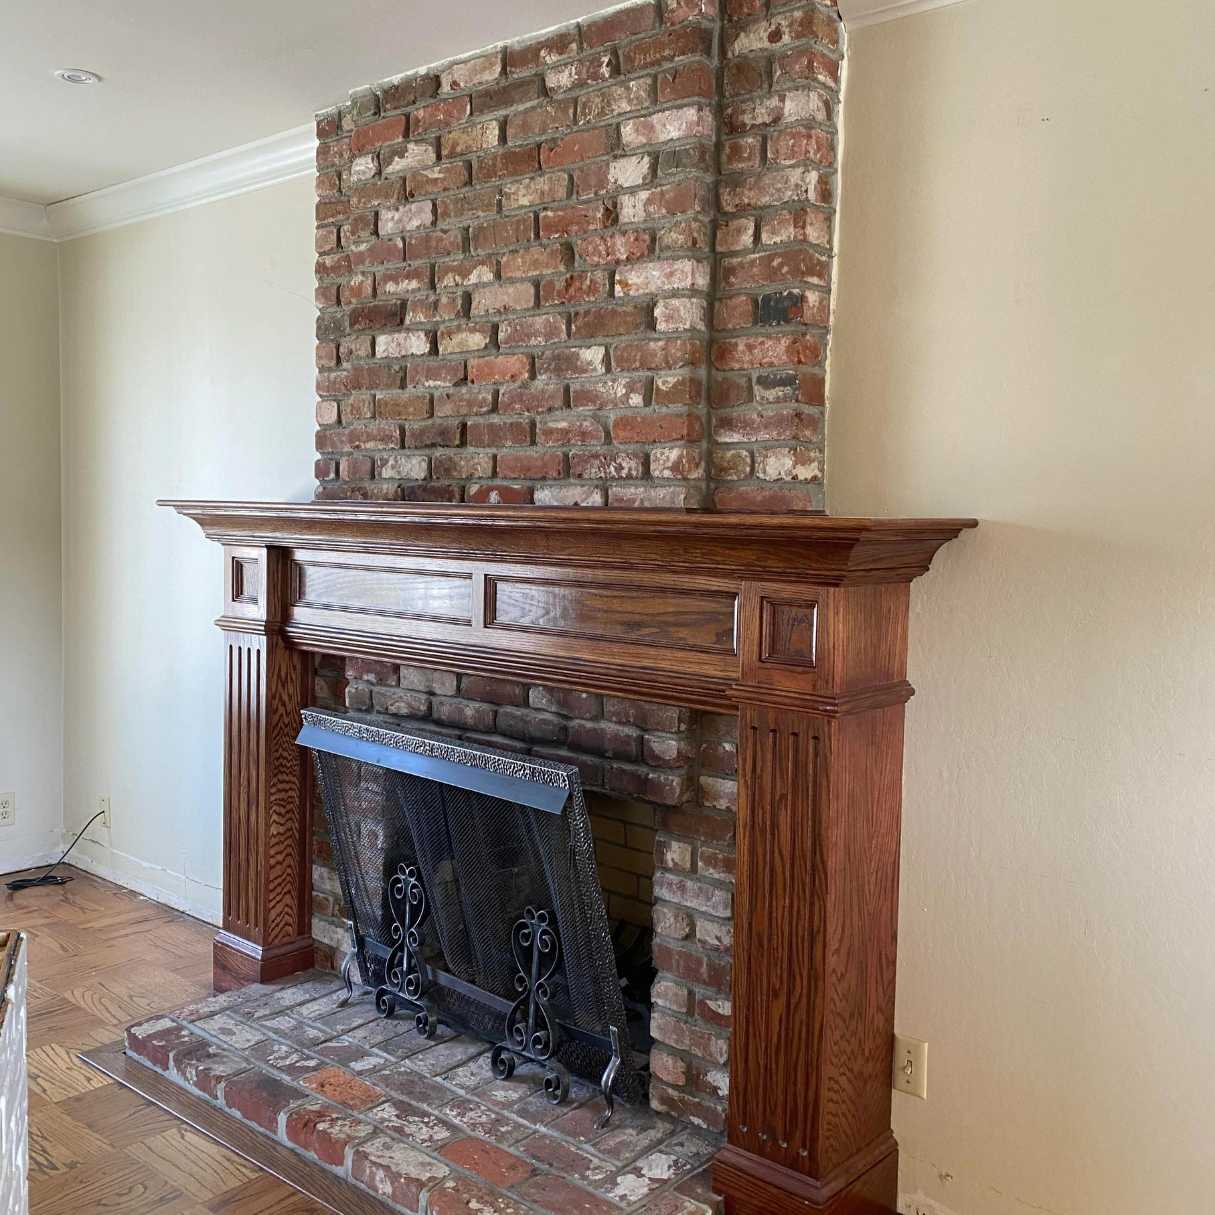 How To Cover A Brick Fireplace